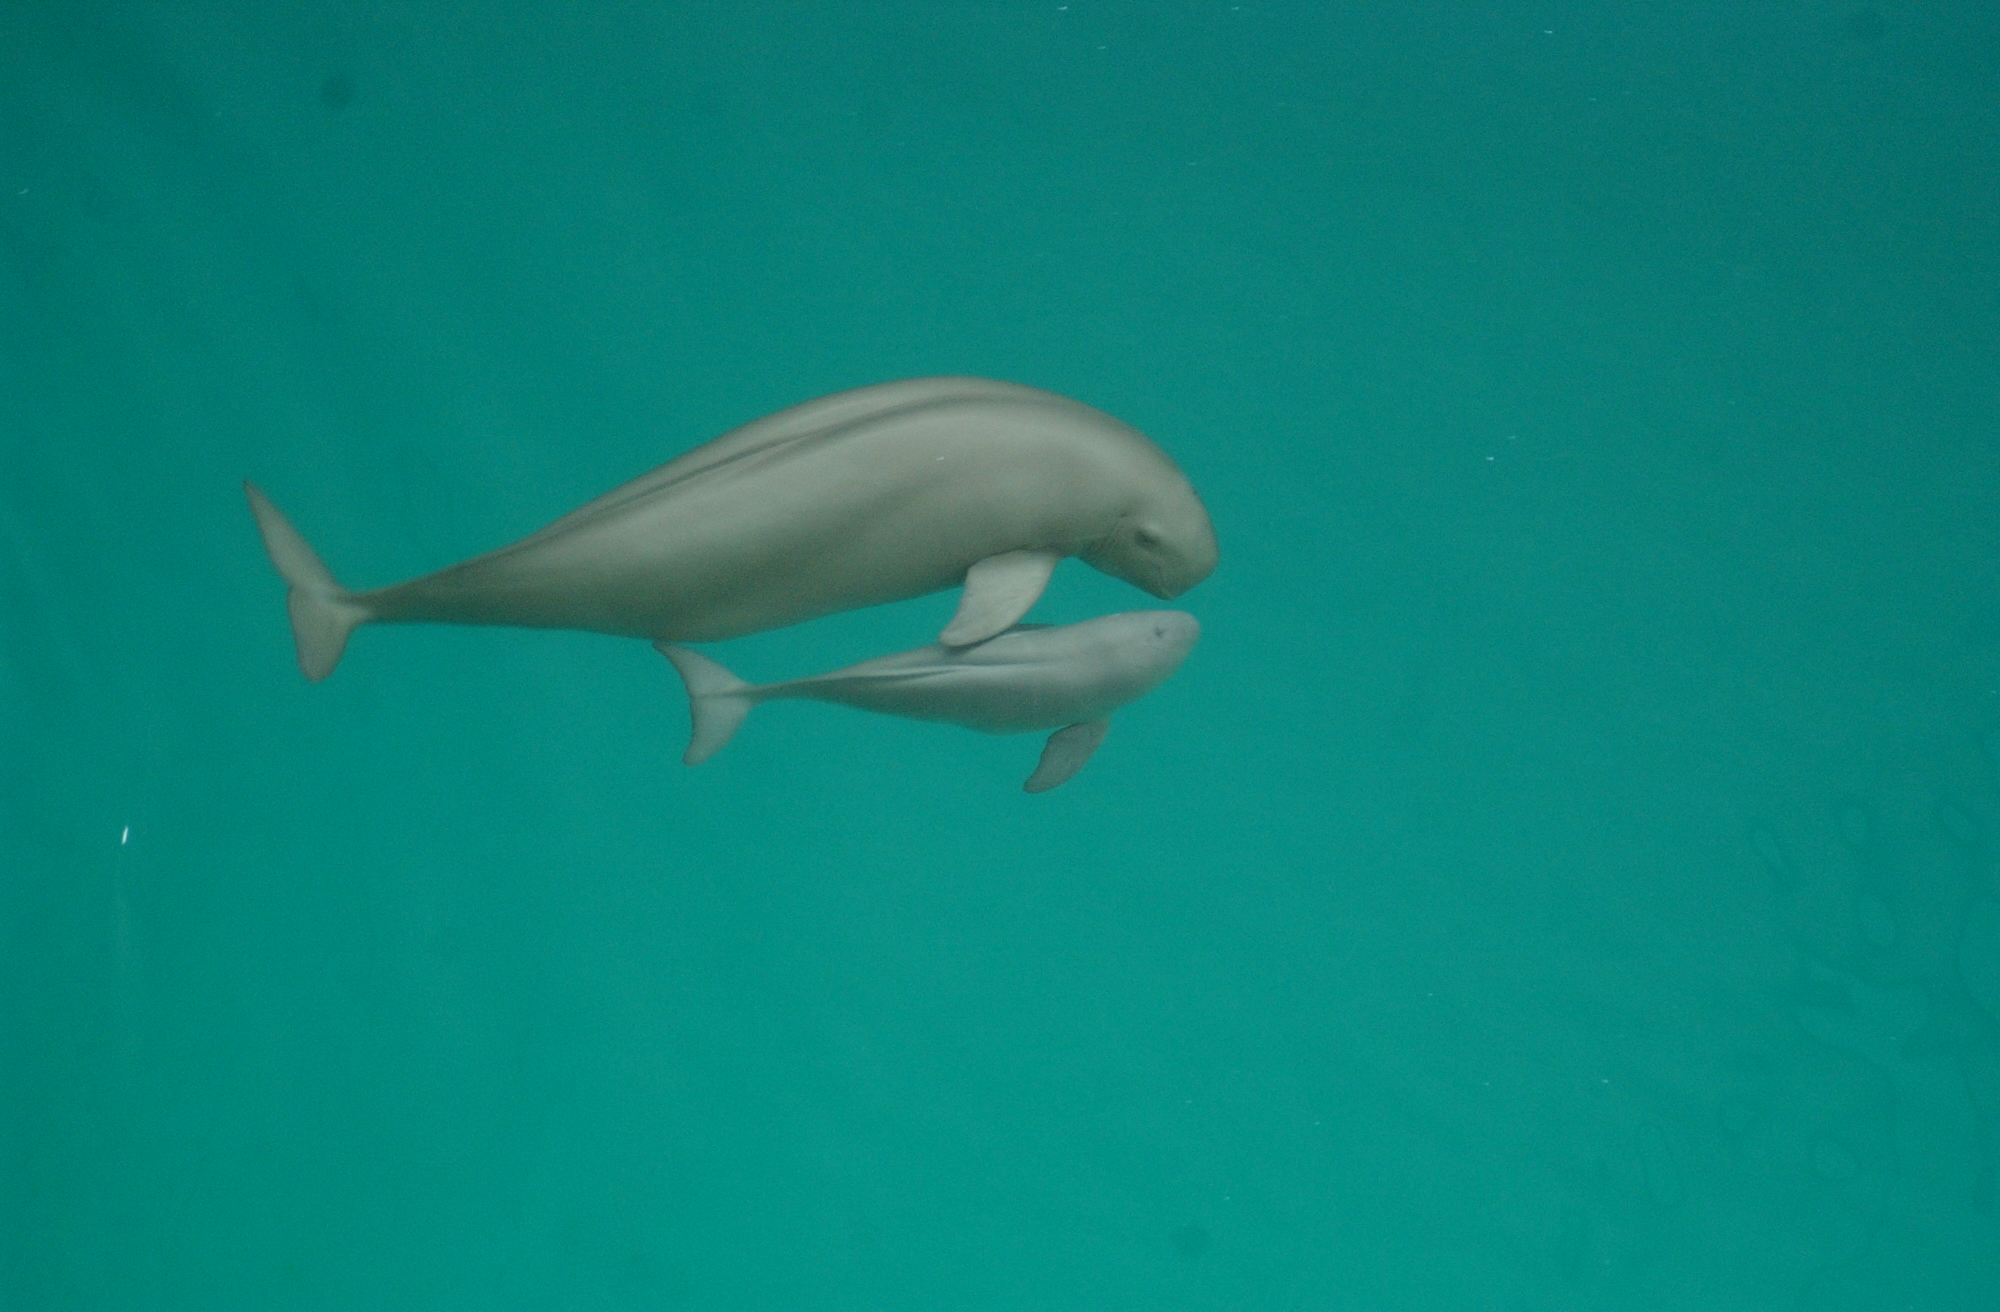 The finless porpoise of the Yangtze River. This mother and her calf are in a semi natural reserve, protected from the vessel traffic and fishing nets in the main river